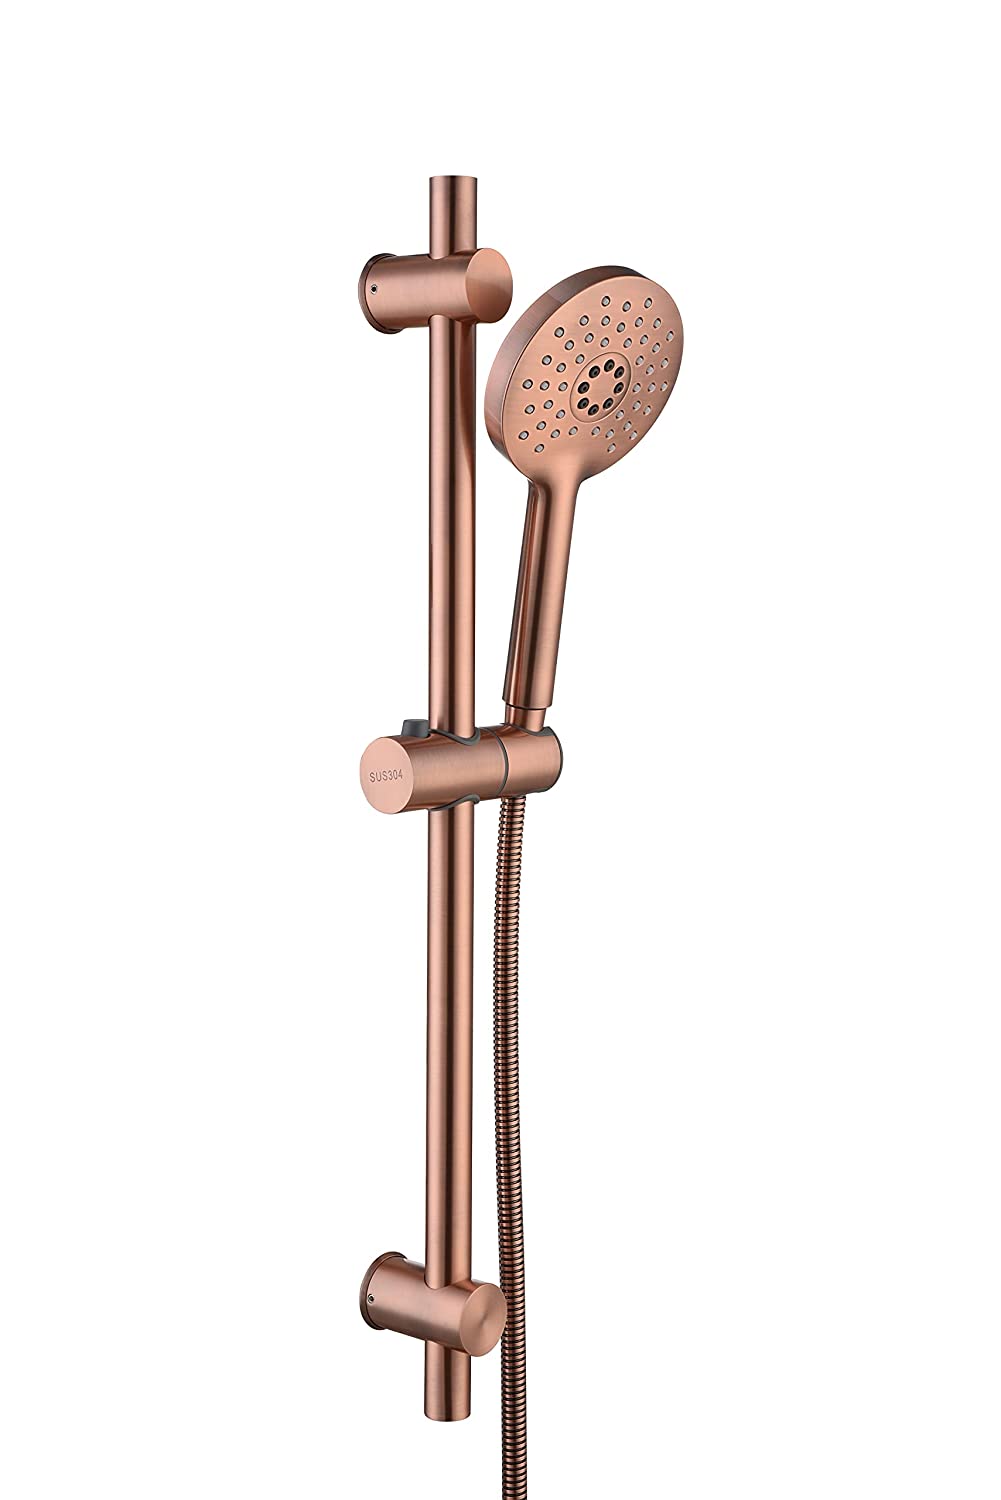 Parryware Night Life Hand Shower T4931A6 (Red Copper)-Taps & Dies-dealsplant